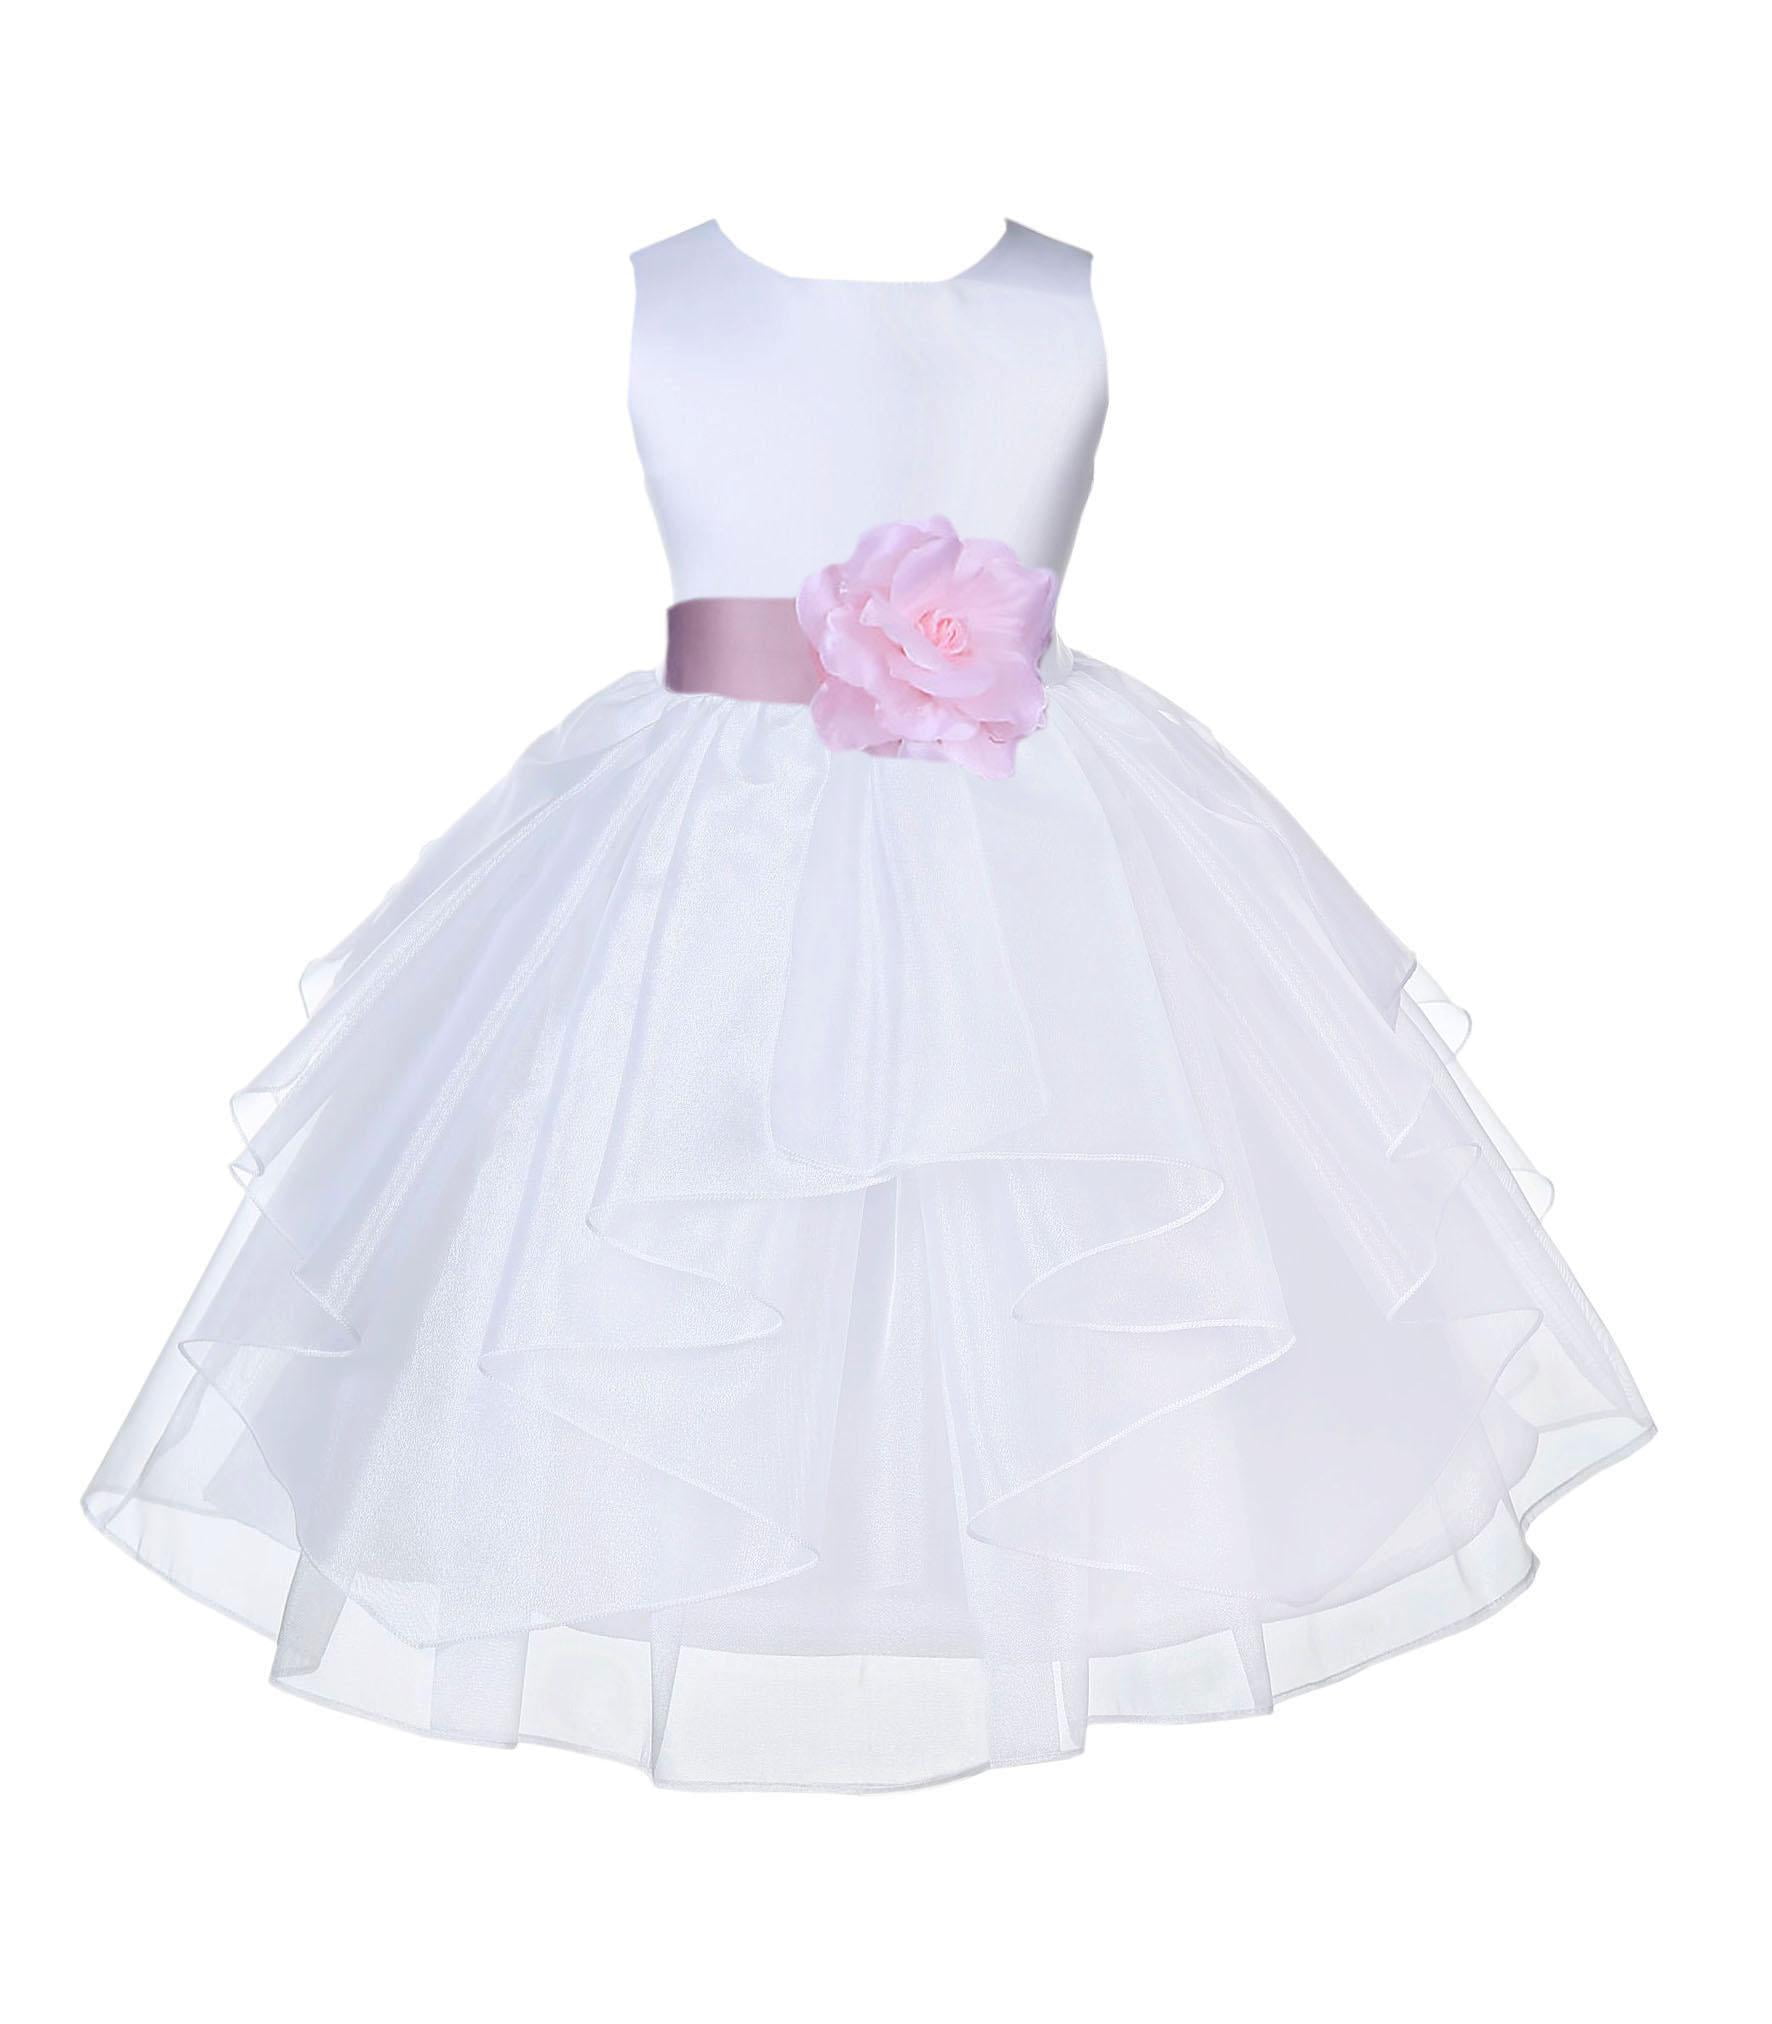 Flower Toddler Girls Summer Easter Dress Ceremony Party Pageant Holiday Outfits